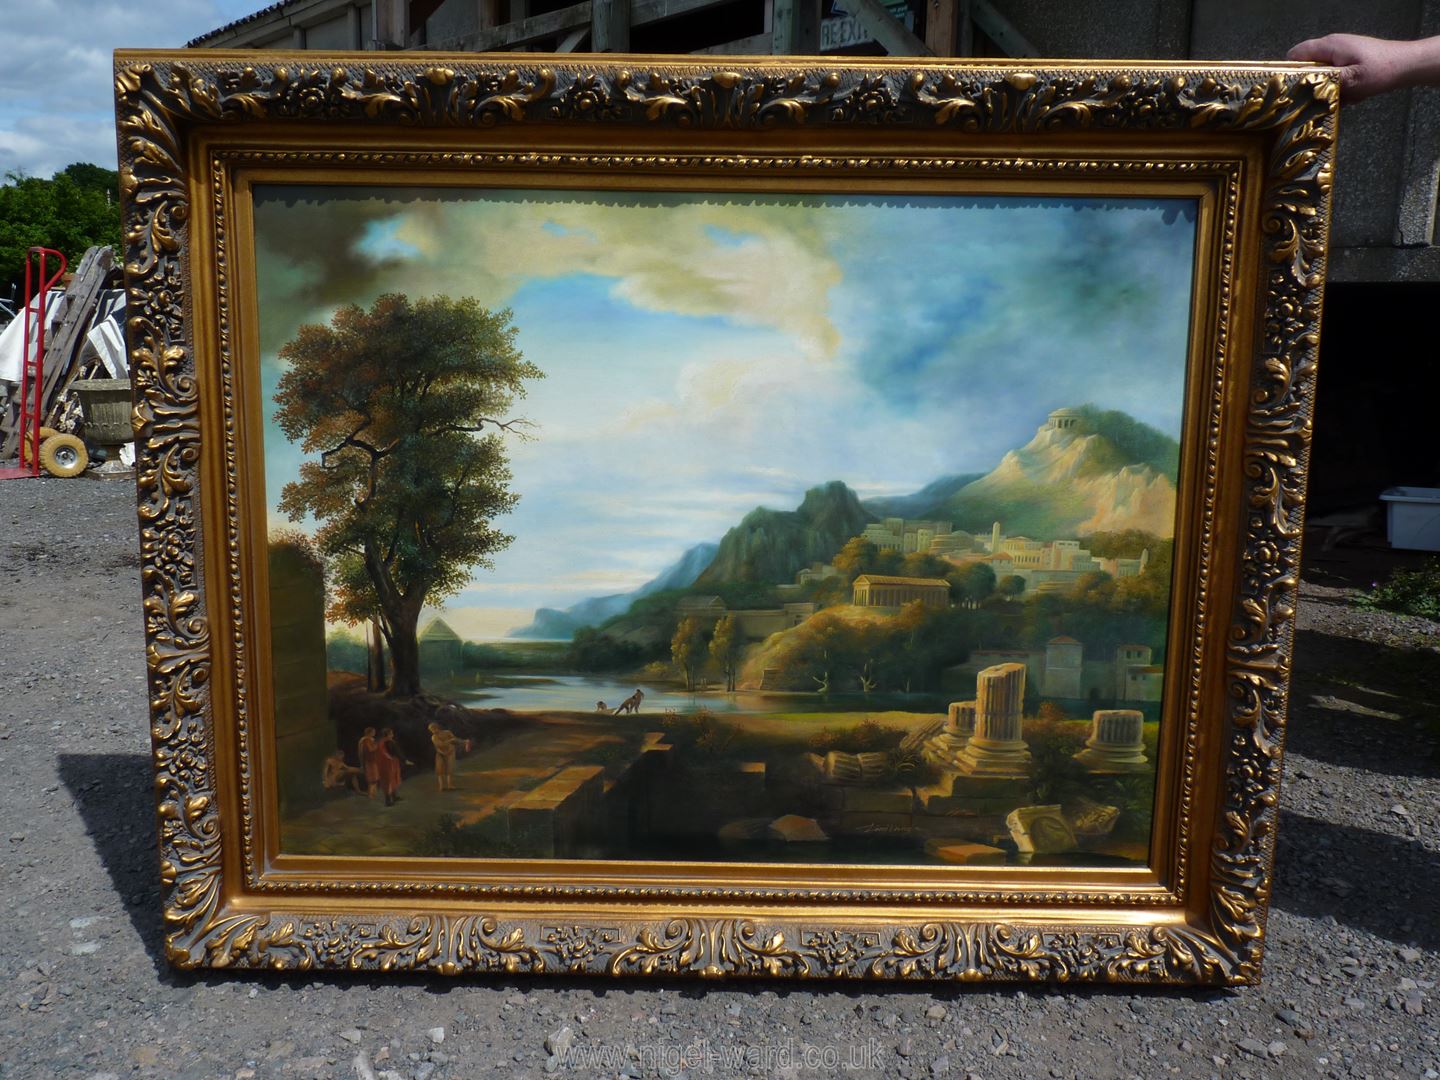 A contemporary Oil on canvas of a landscape with ruins in the foreground being a reproduction of